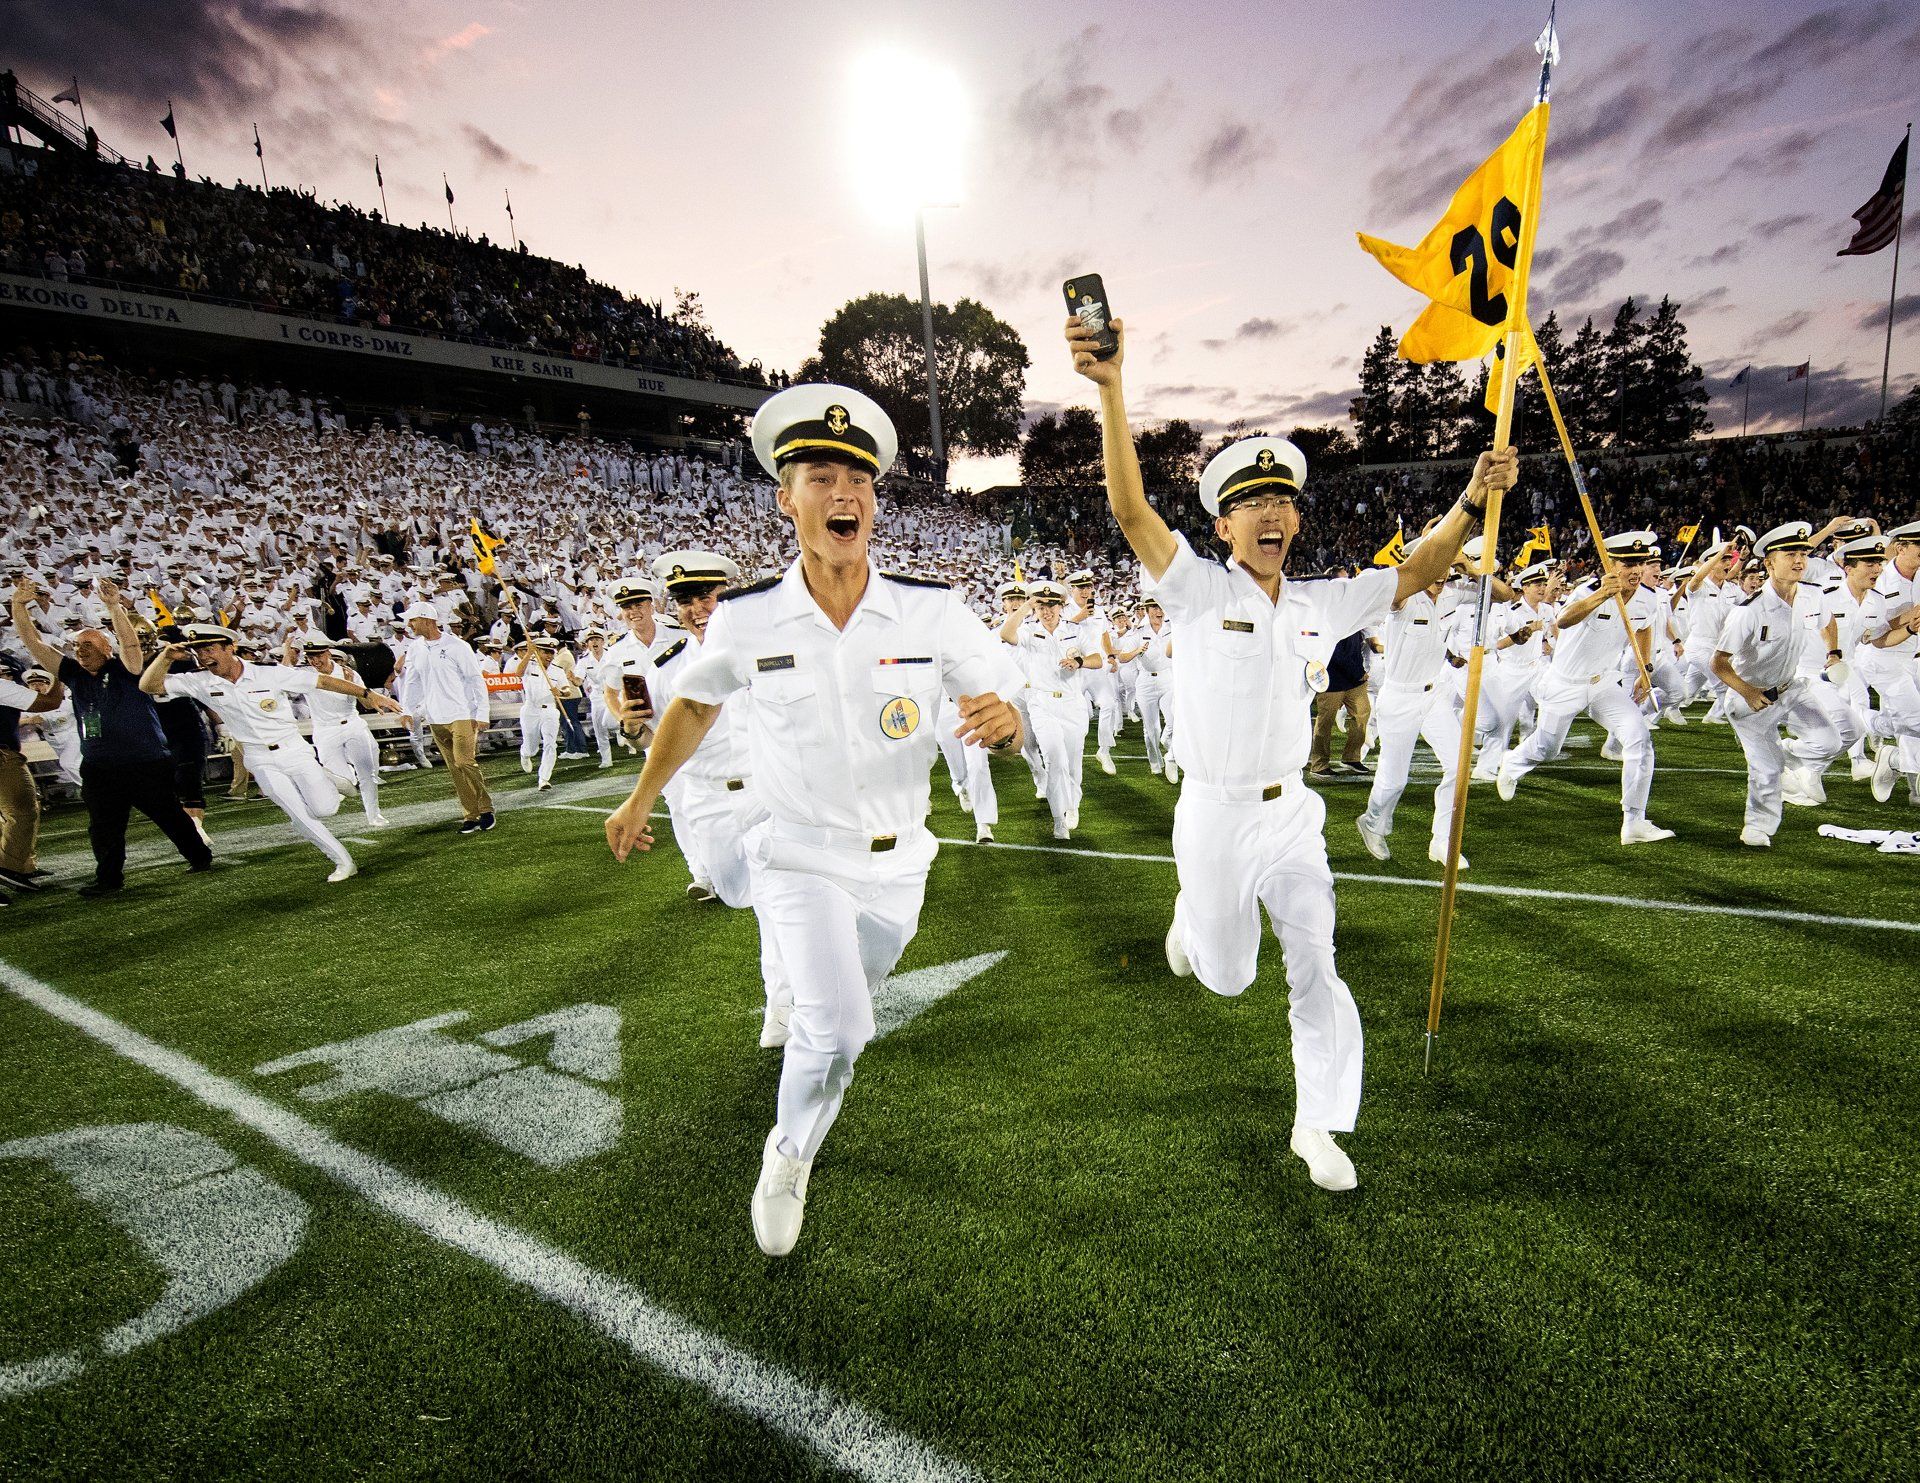 Naval cadets run on the field during a Navy vs Air Force football game